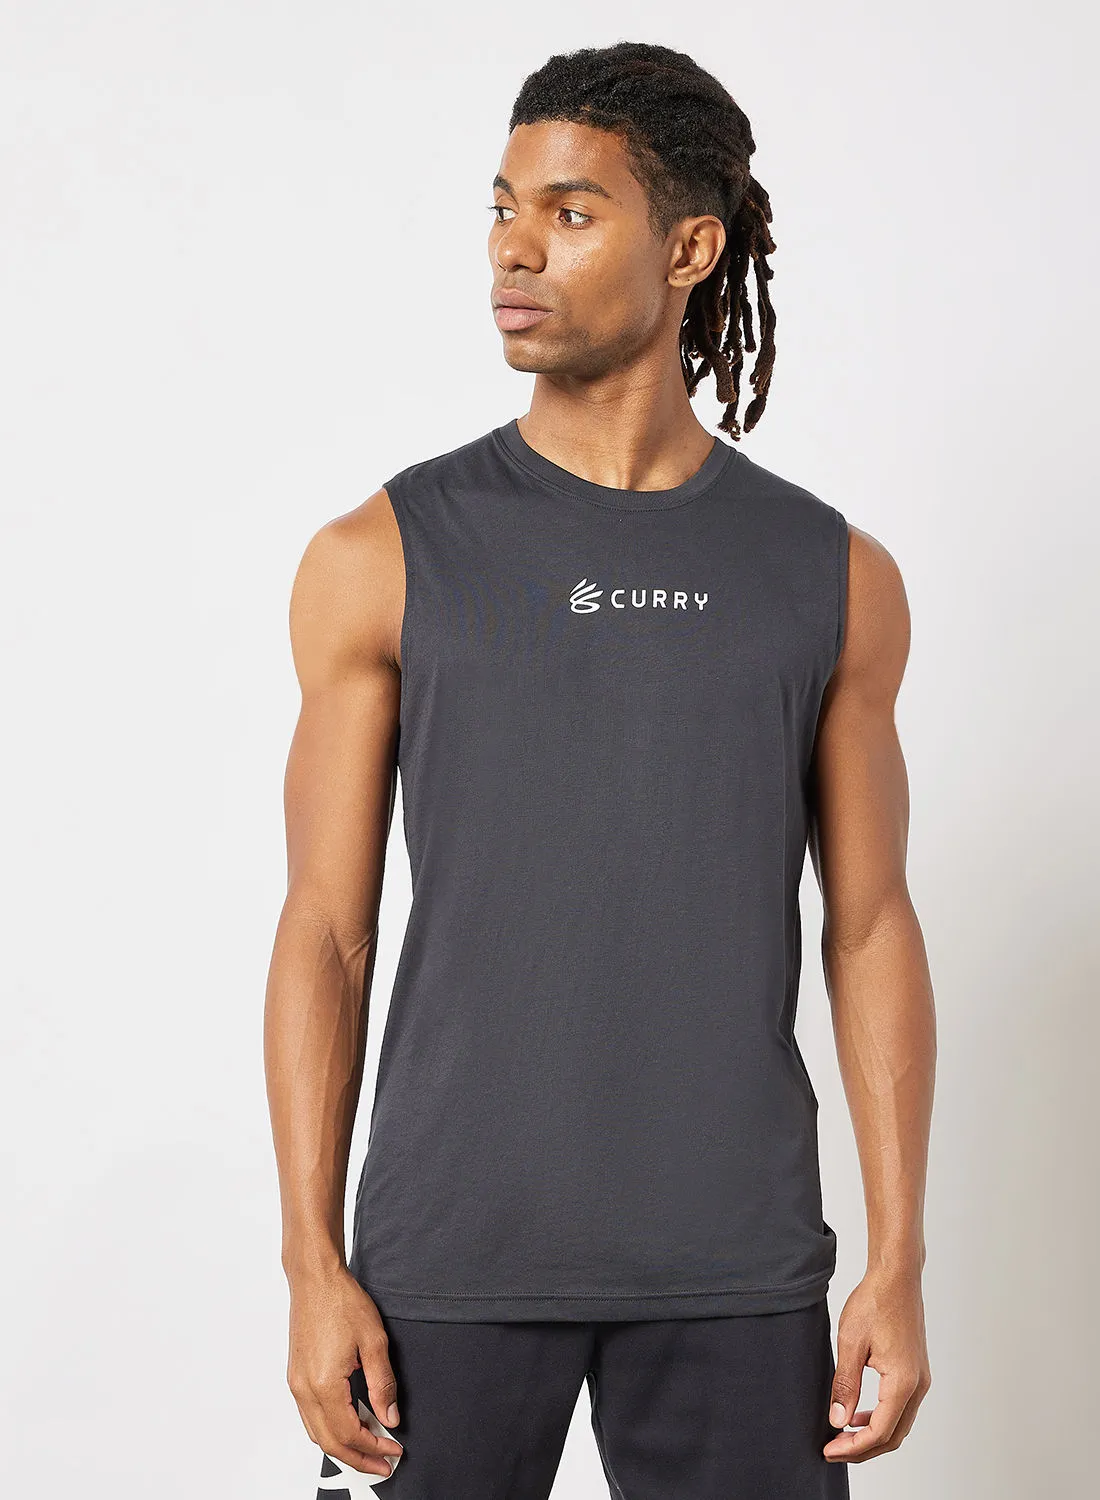 UNDER ARMOUR Curry Graphic Tank Top